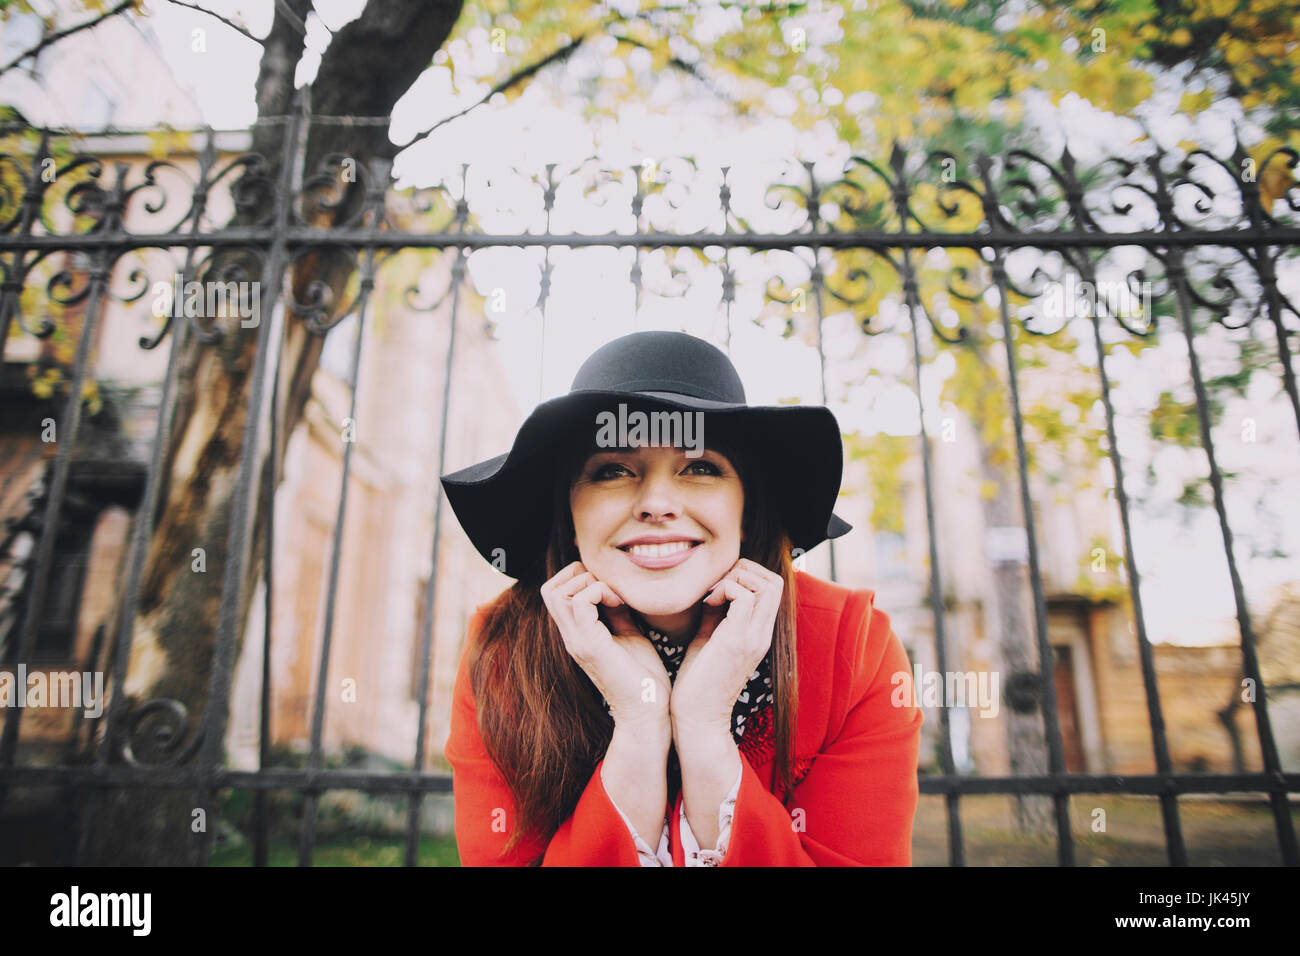 Portrait of smiling Caucasian woman wearing hat near fence Stock Photo